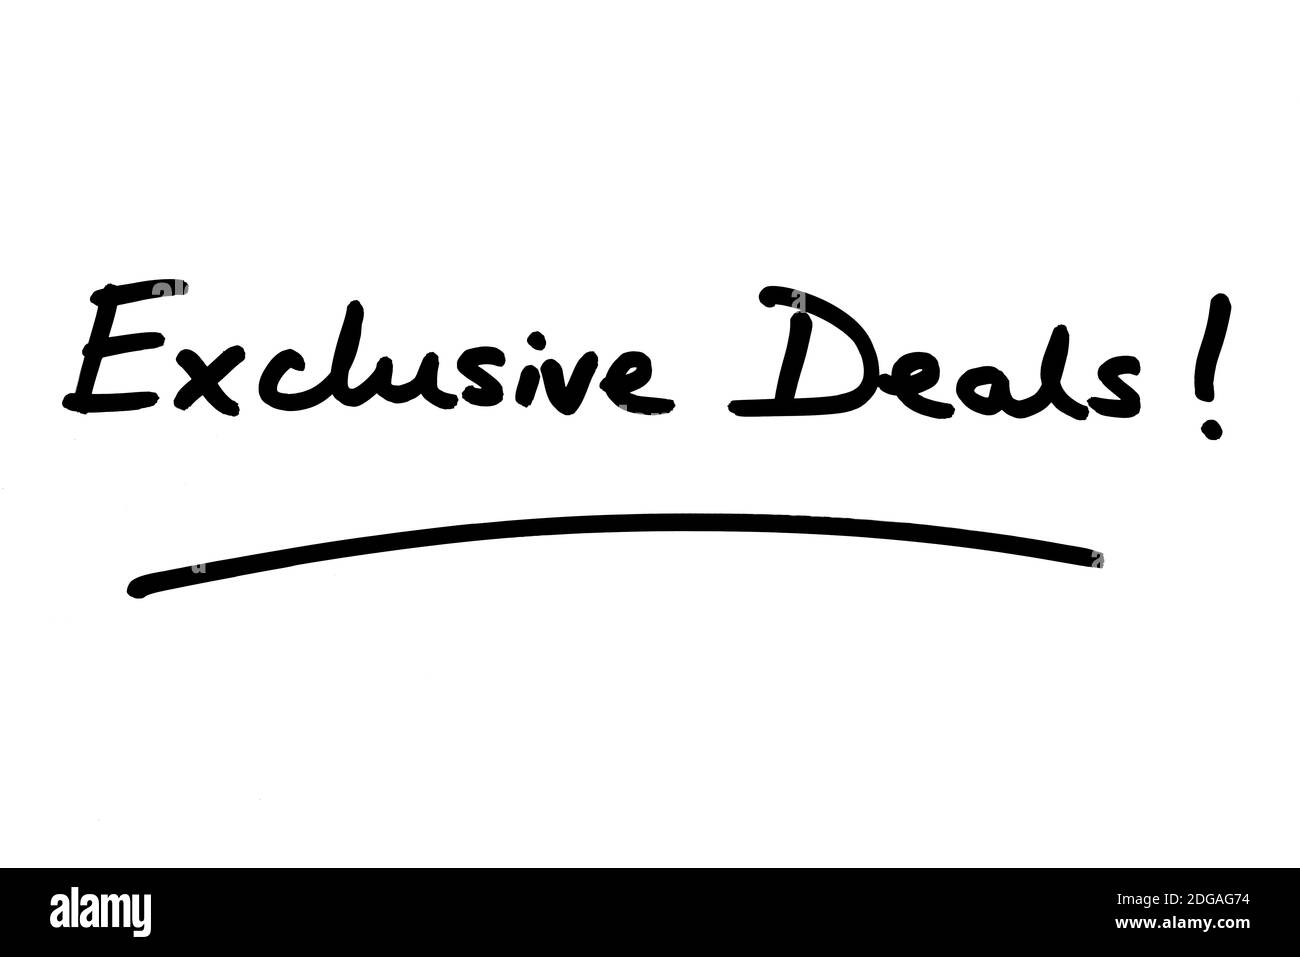 Exclusive Deals! handwritten on a white background. Stock Photo